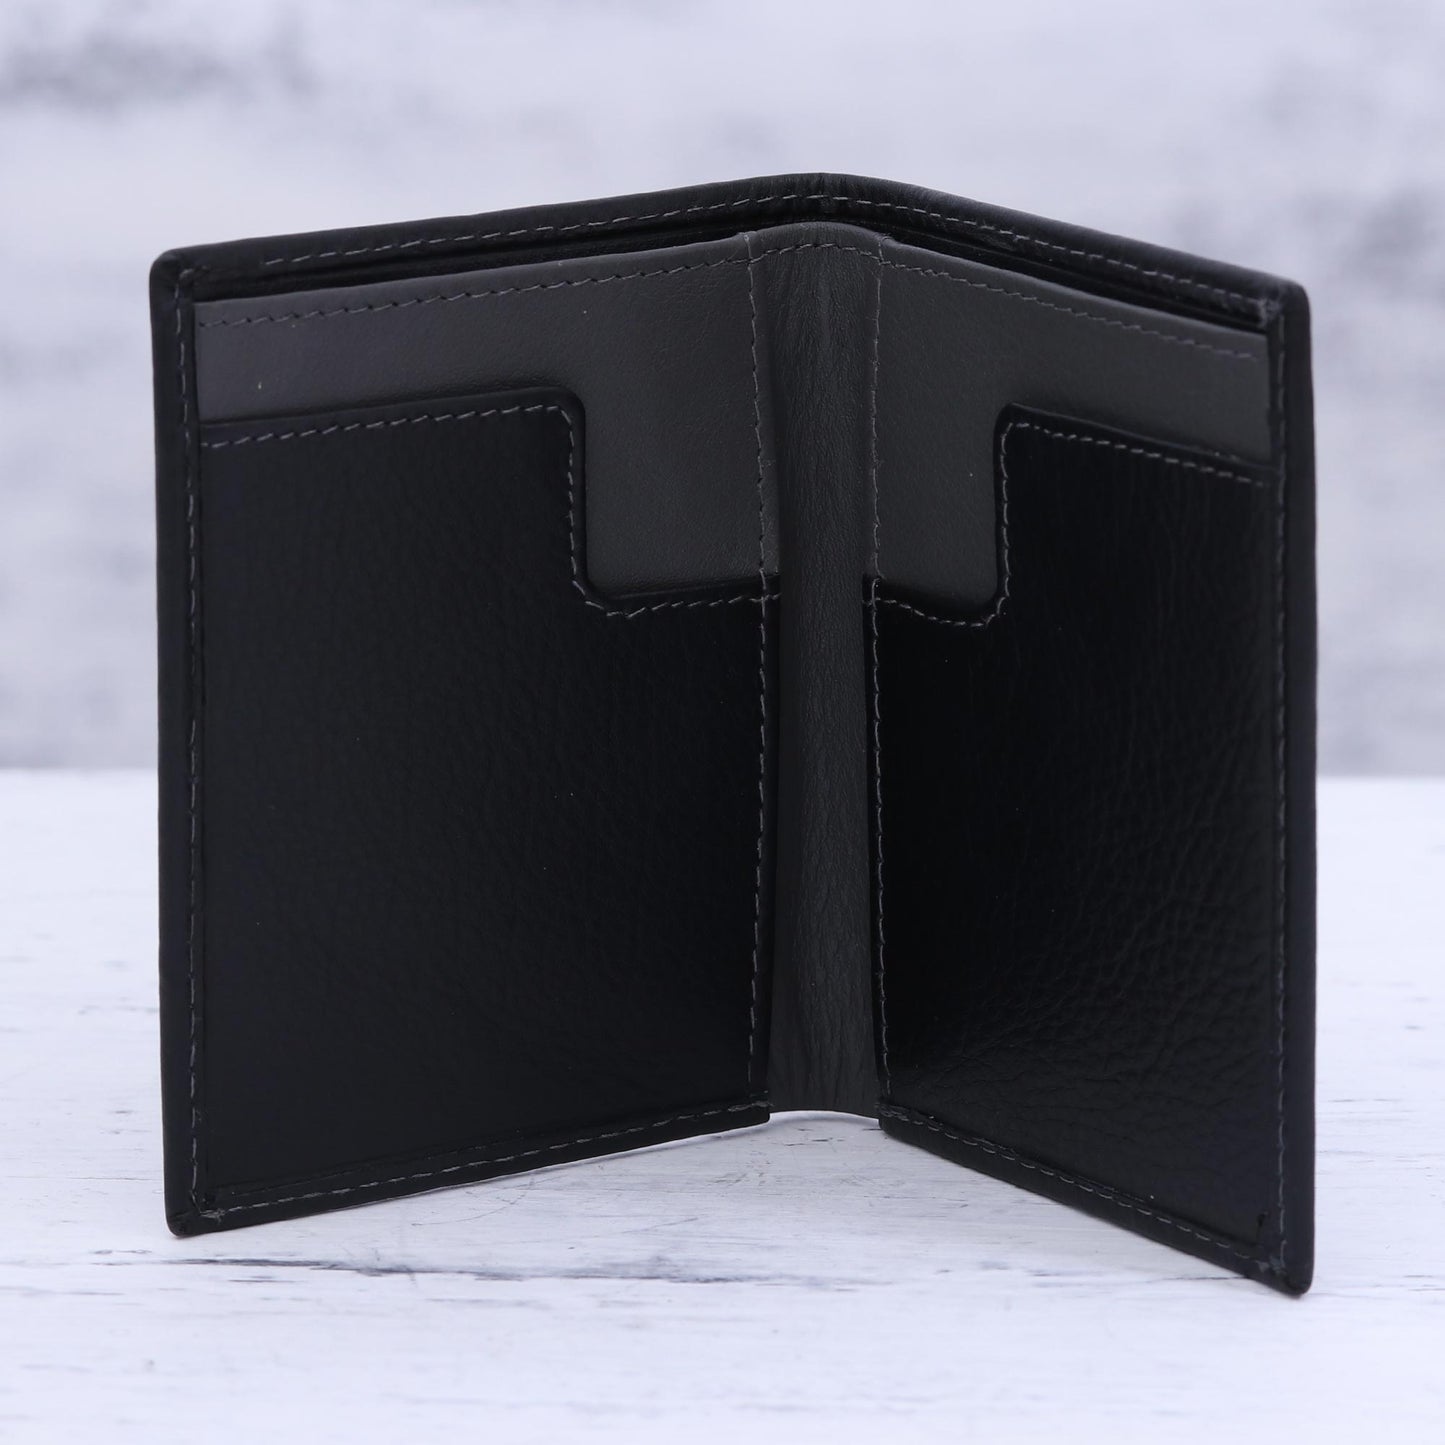 Reliable Black Leather Card Holder Wallet in Black and Grey